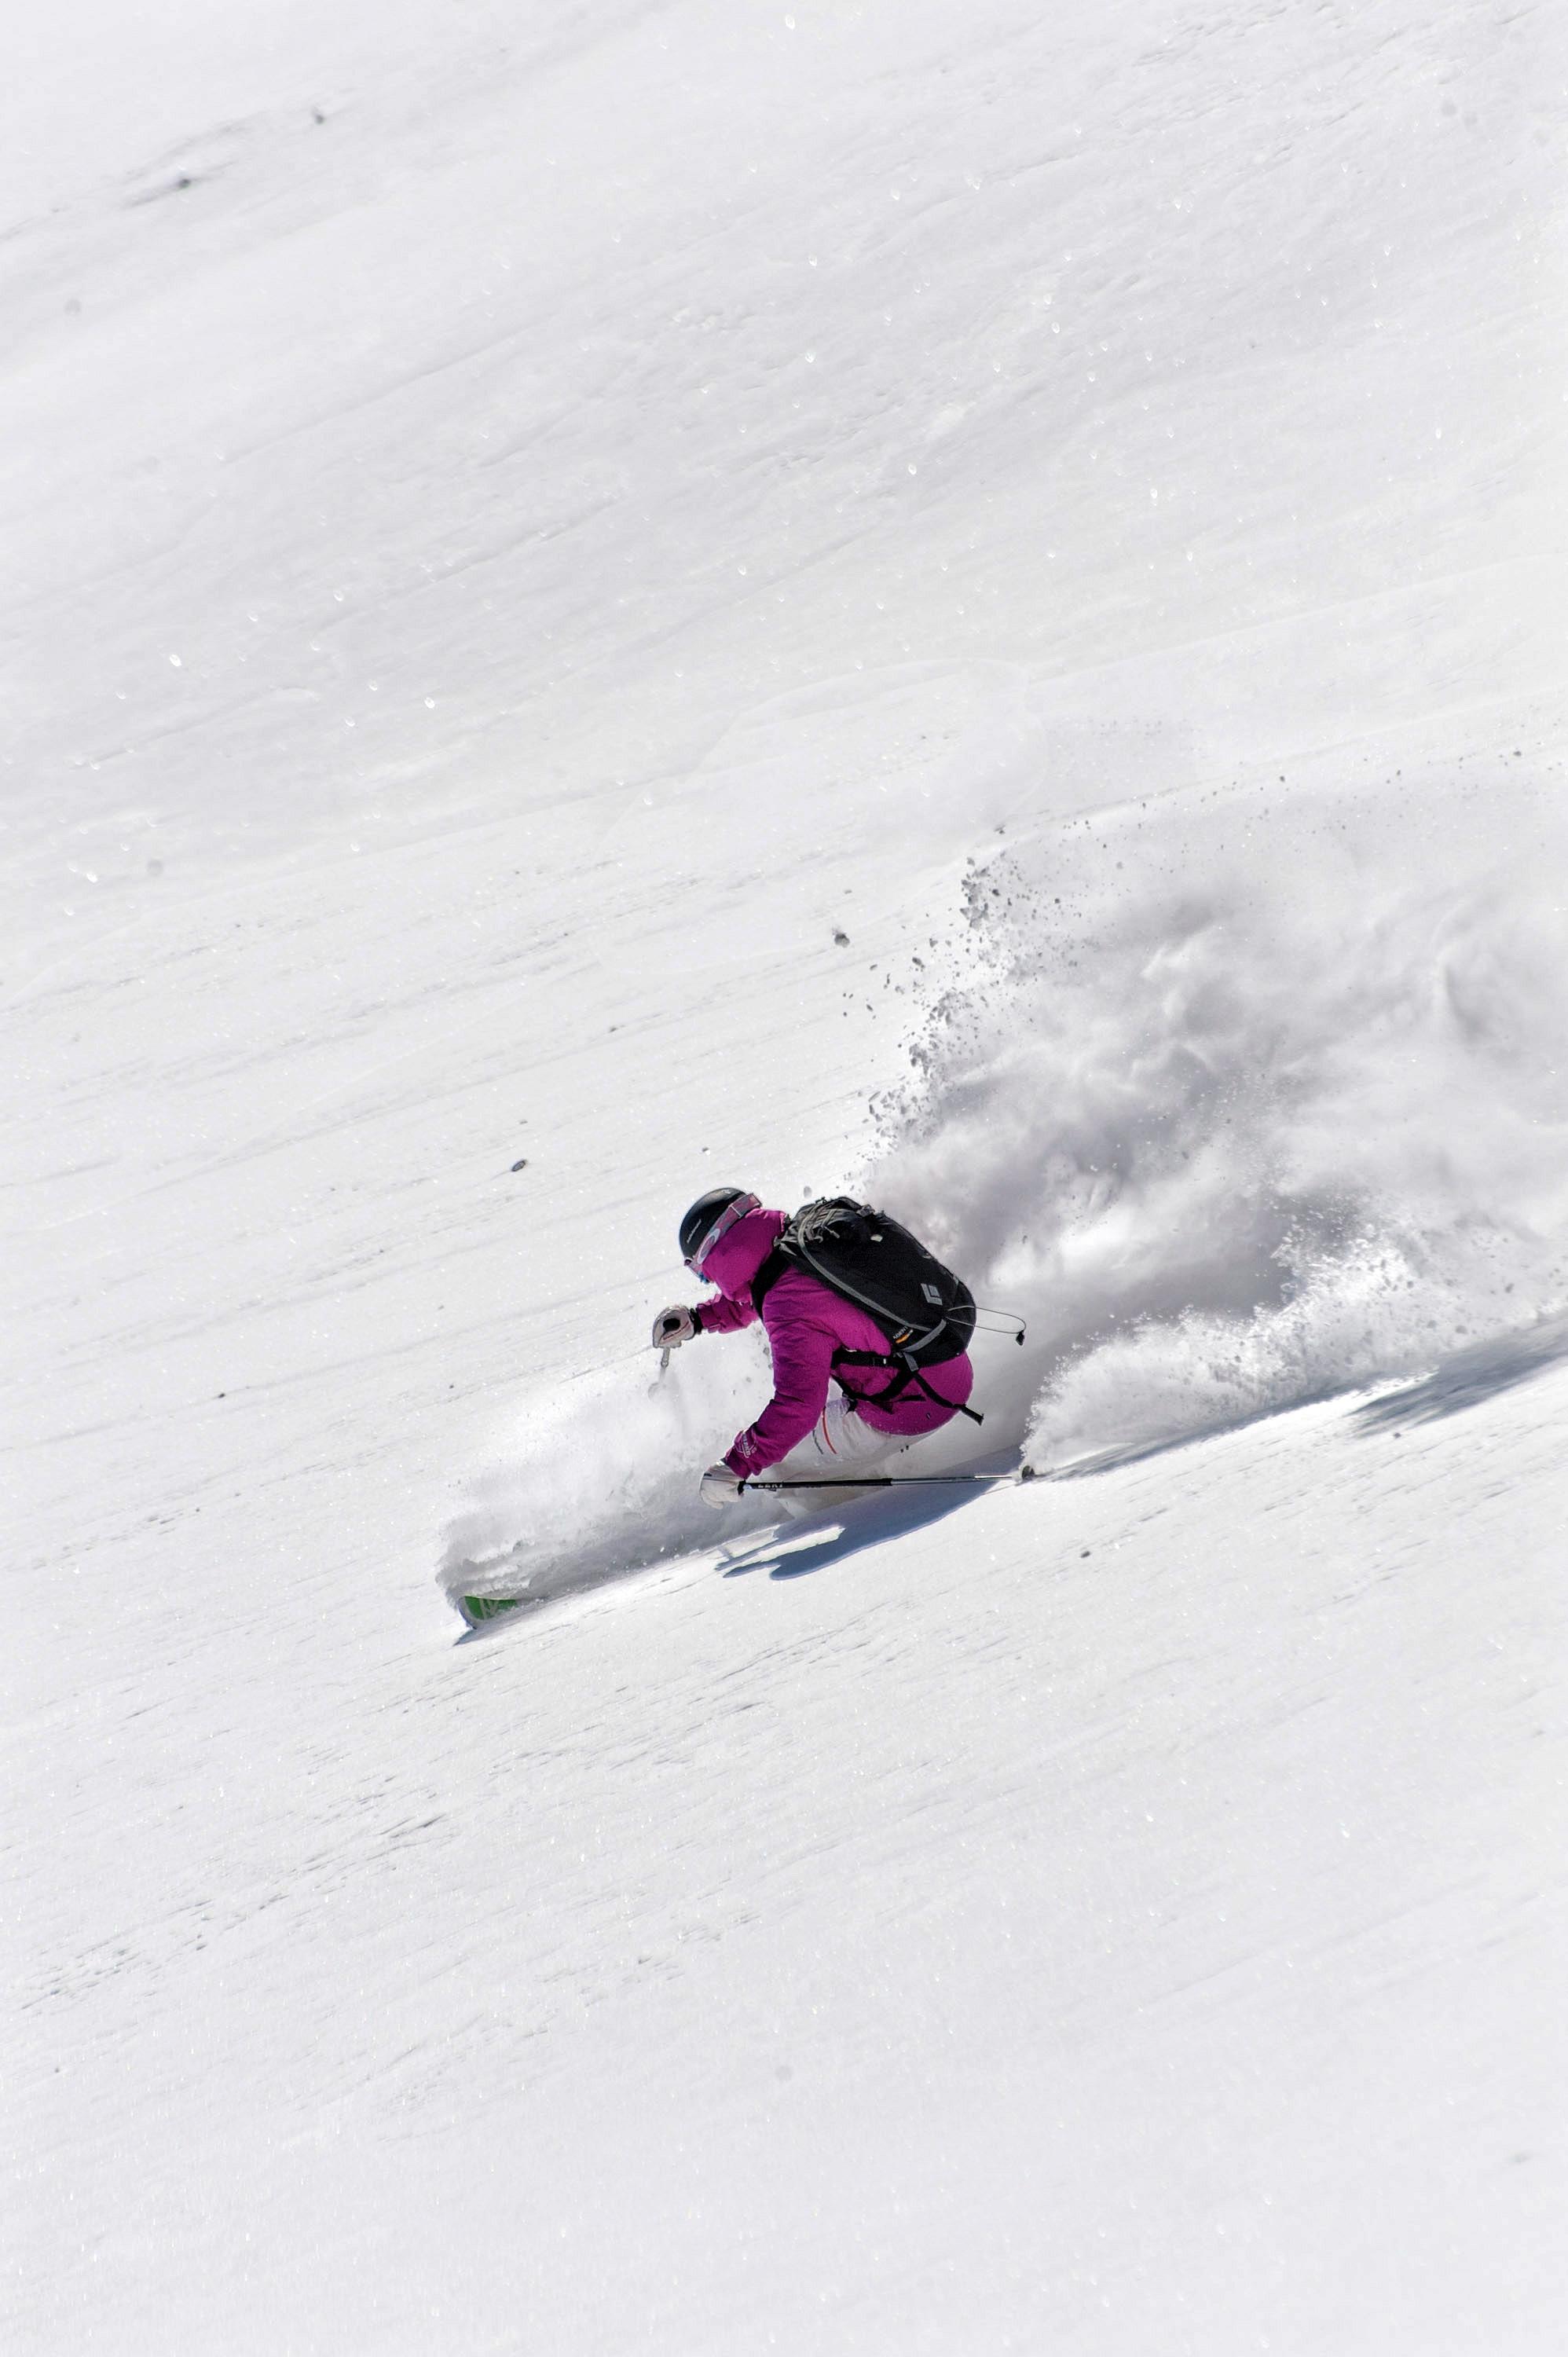 FREERIDER IN POWDERSNOW WITHE VIOLET JACKET AND A BLACK BACKPACK